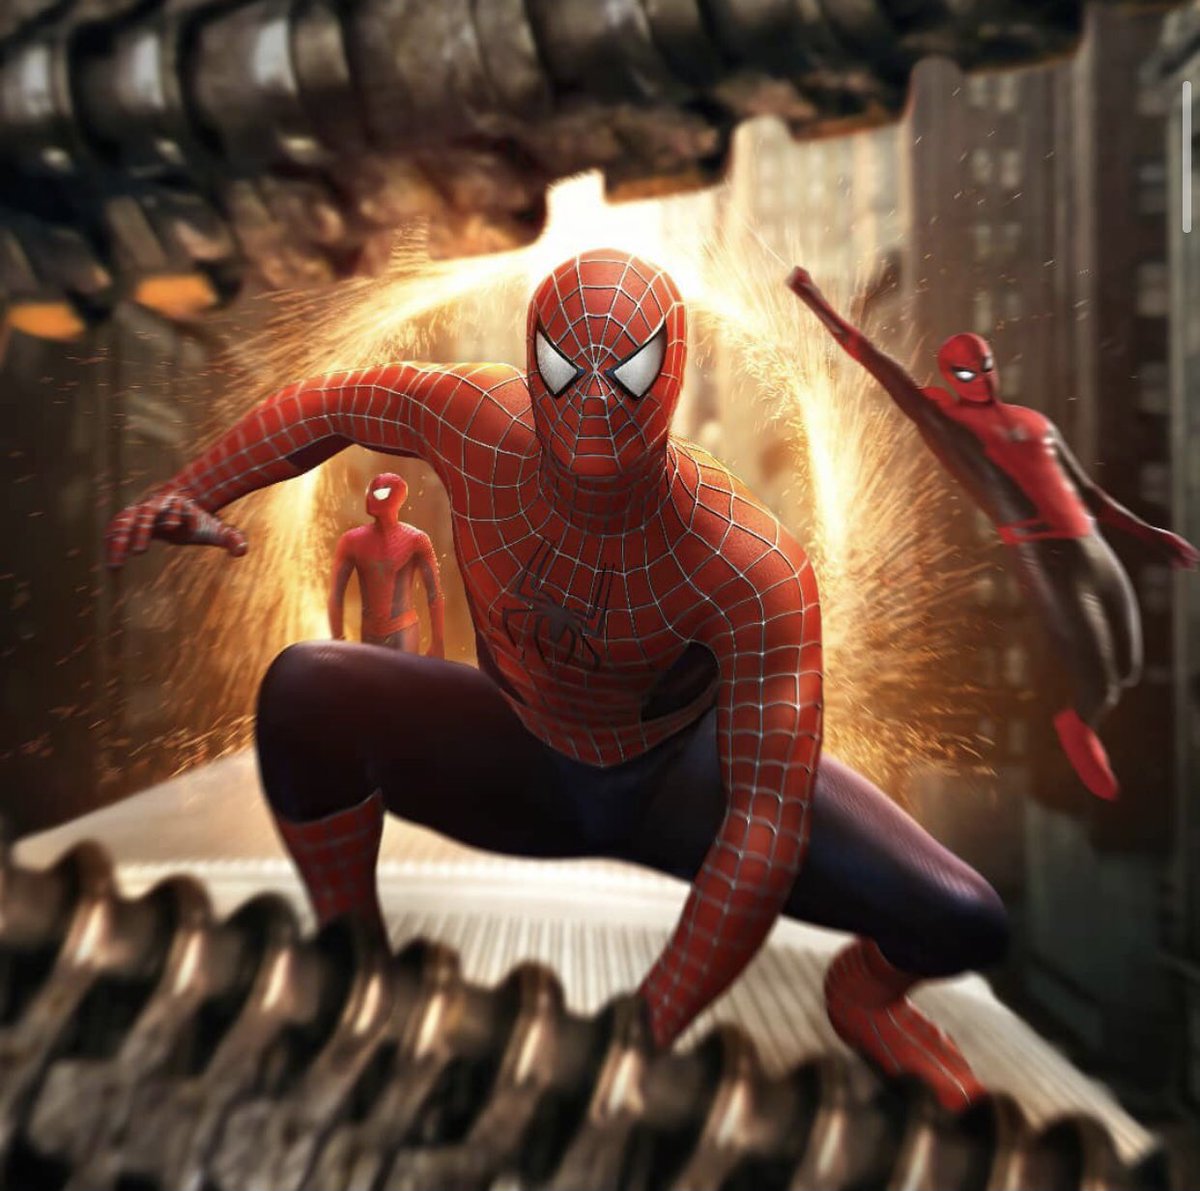 RT @tobey_maguire2: 2021 Spider-Man train fight?!
#TobeyMaguire #SpiderManNoWayHome https://t.co/uIbA4XUApv